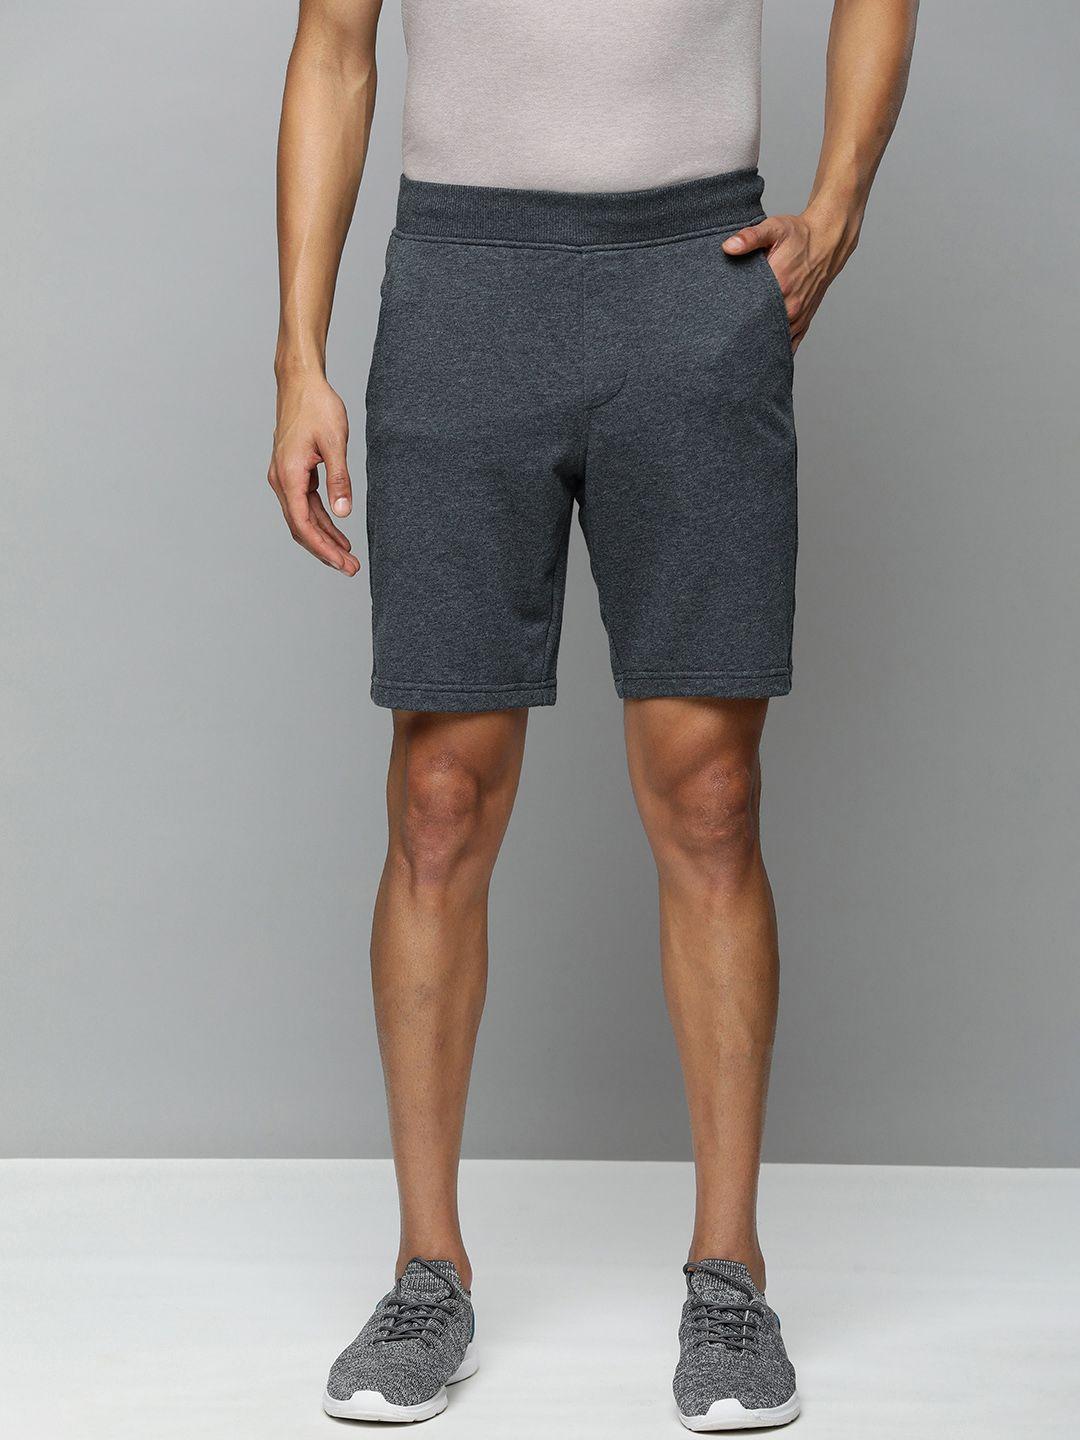 skechers-men-charcoal-sports-shorts-with-e-dry-technology-technology